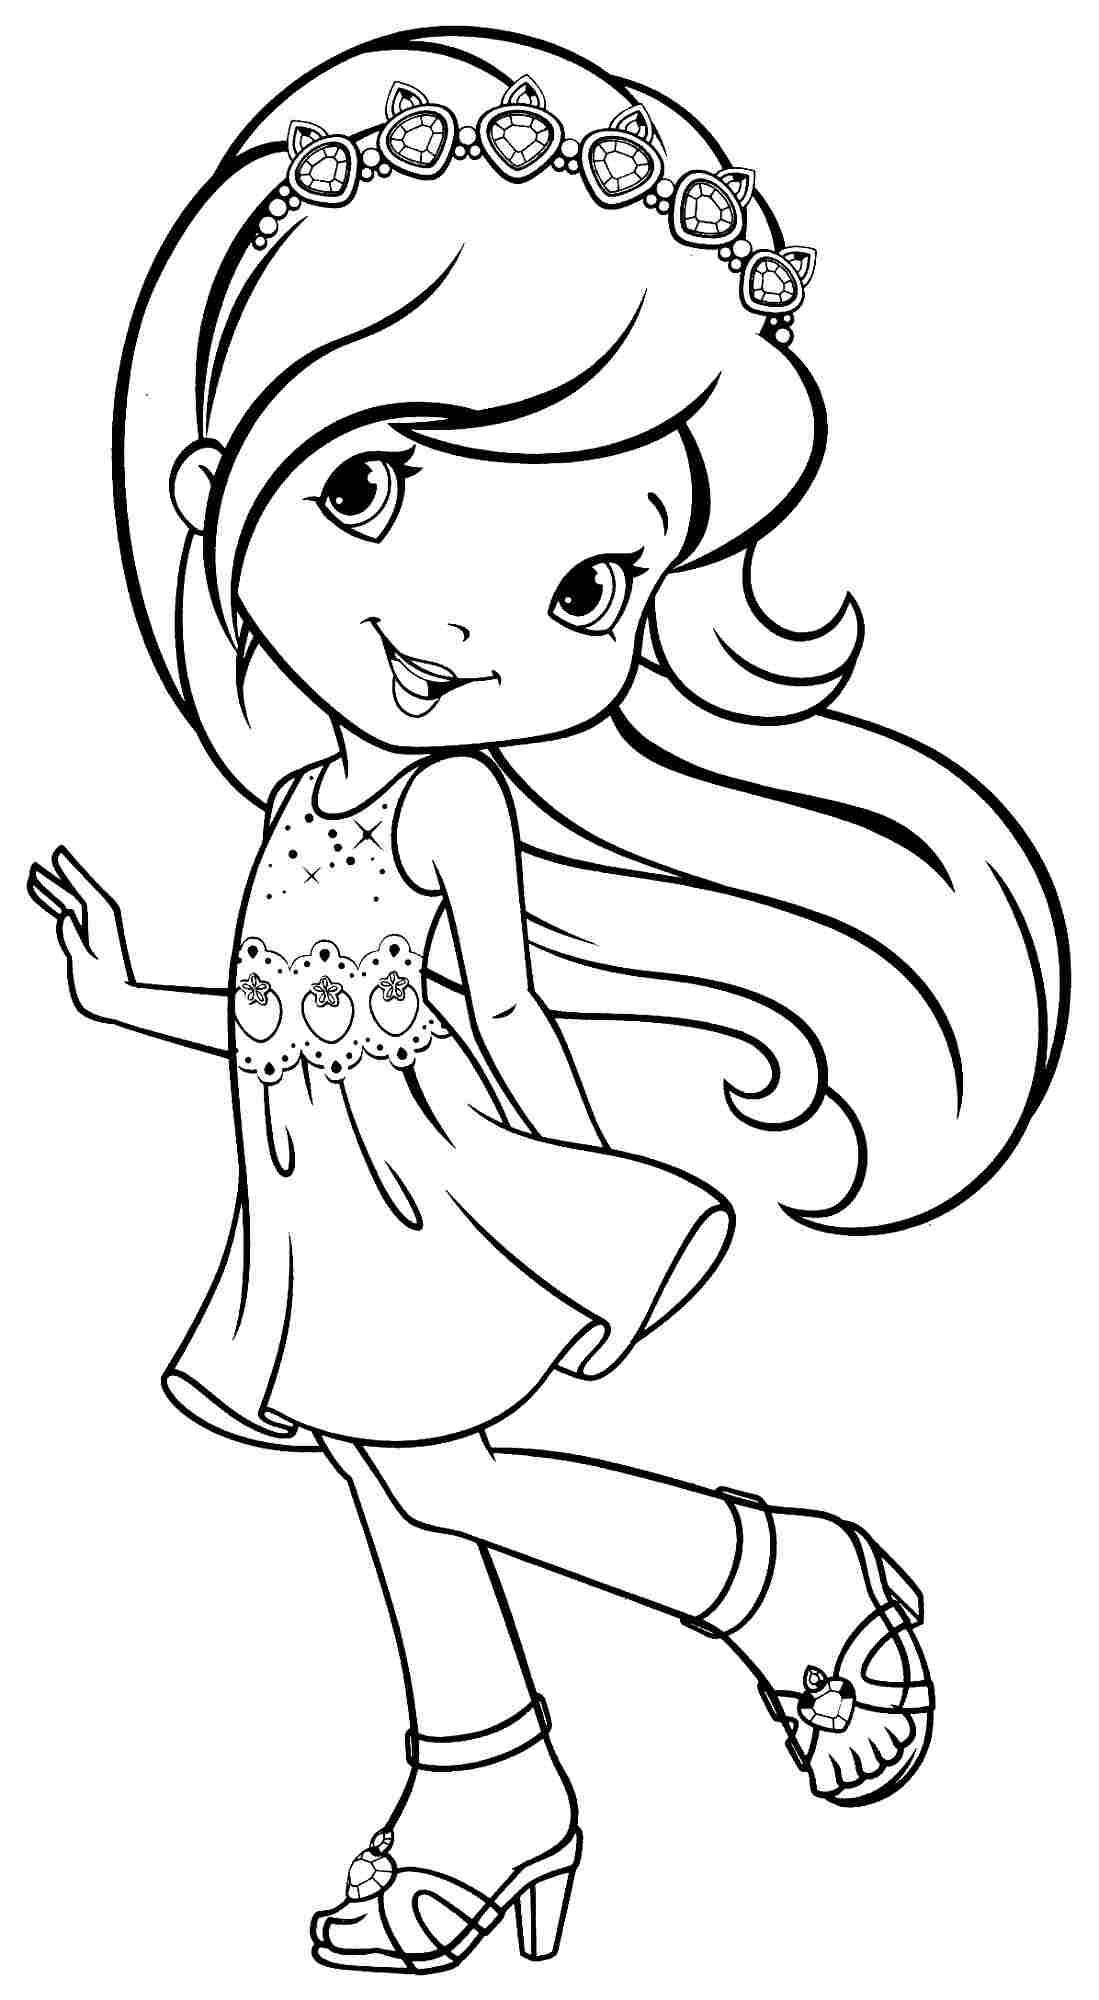 Printable Strawberry Shortcake Coloring Pages Pdf - Printable Strawberry Shortcake Coloring Pages